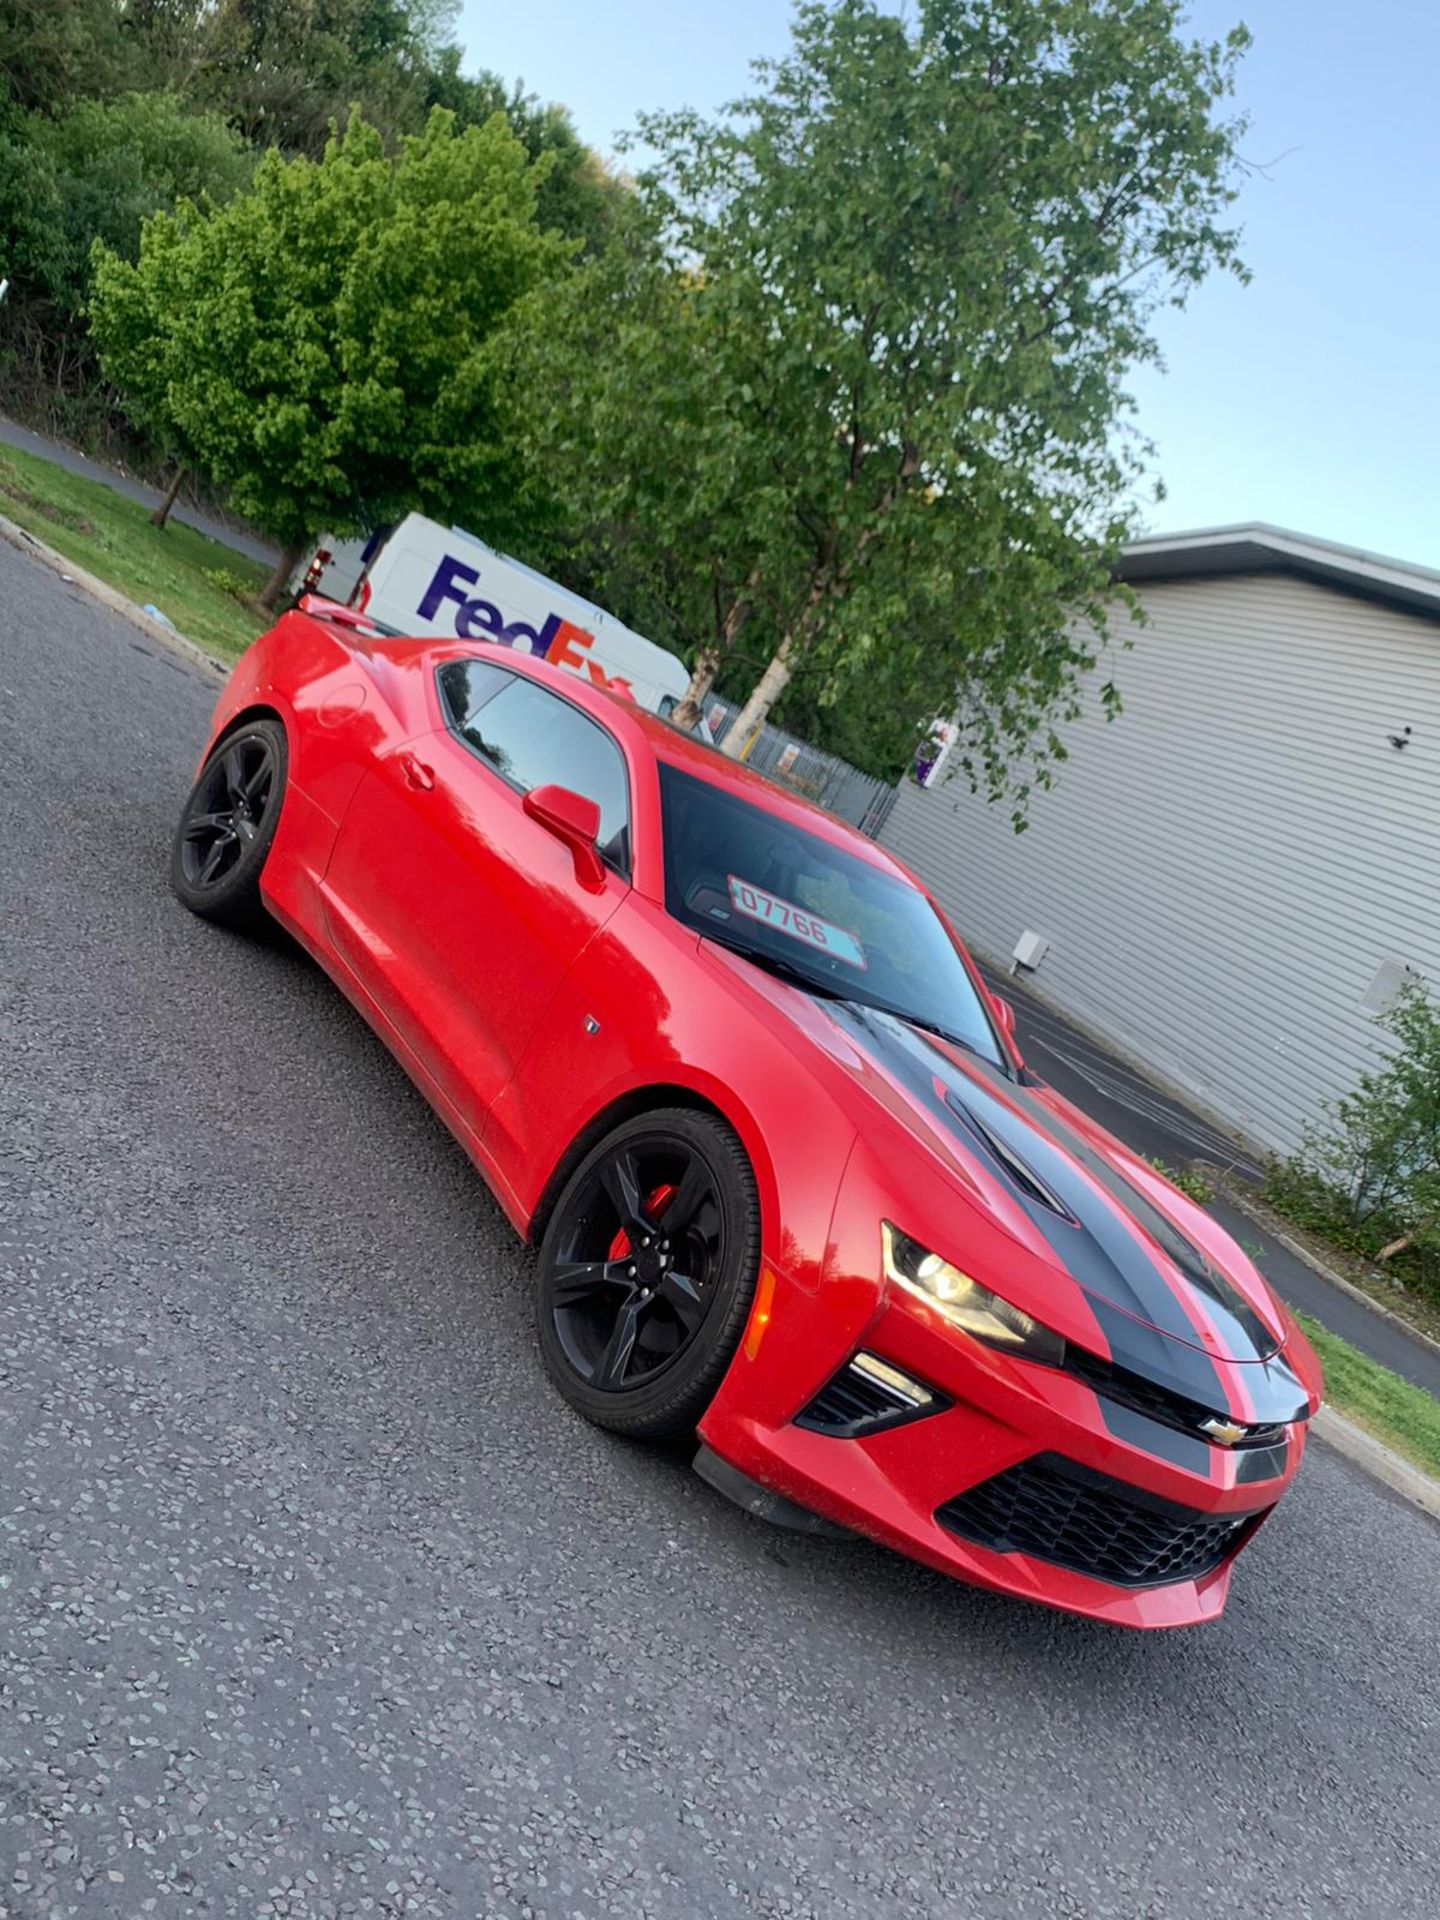 2017 CHEVROLET CAMARO SS 6.2 V8 8 SPEED AUTOMATIC, 19,200 MILES, 12 MONTHS MOT, JUST BEEN SERVICED